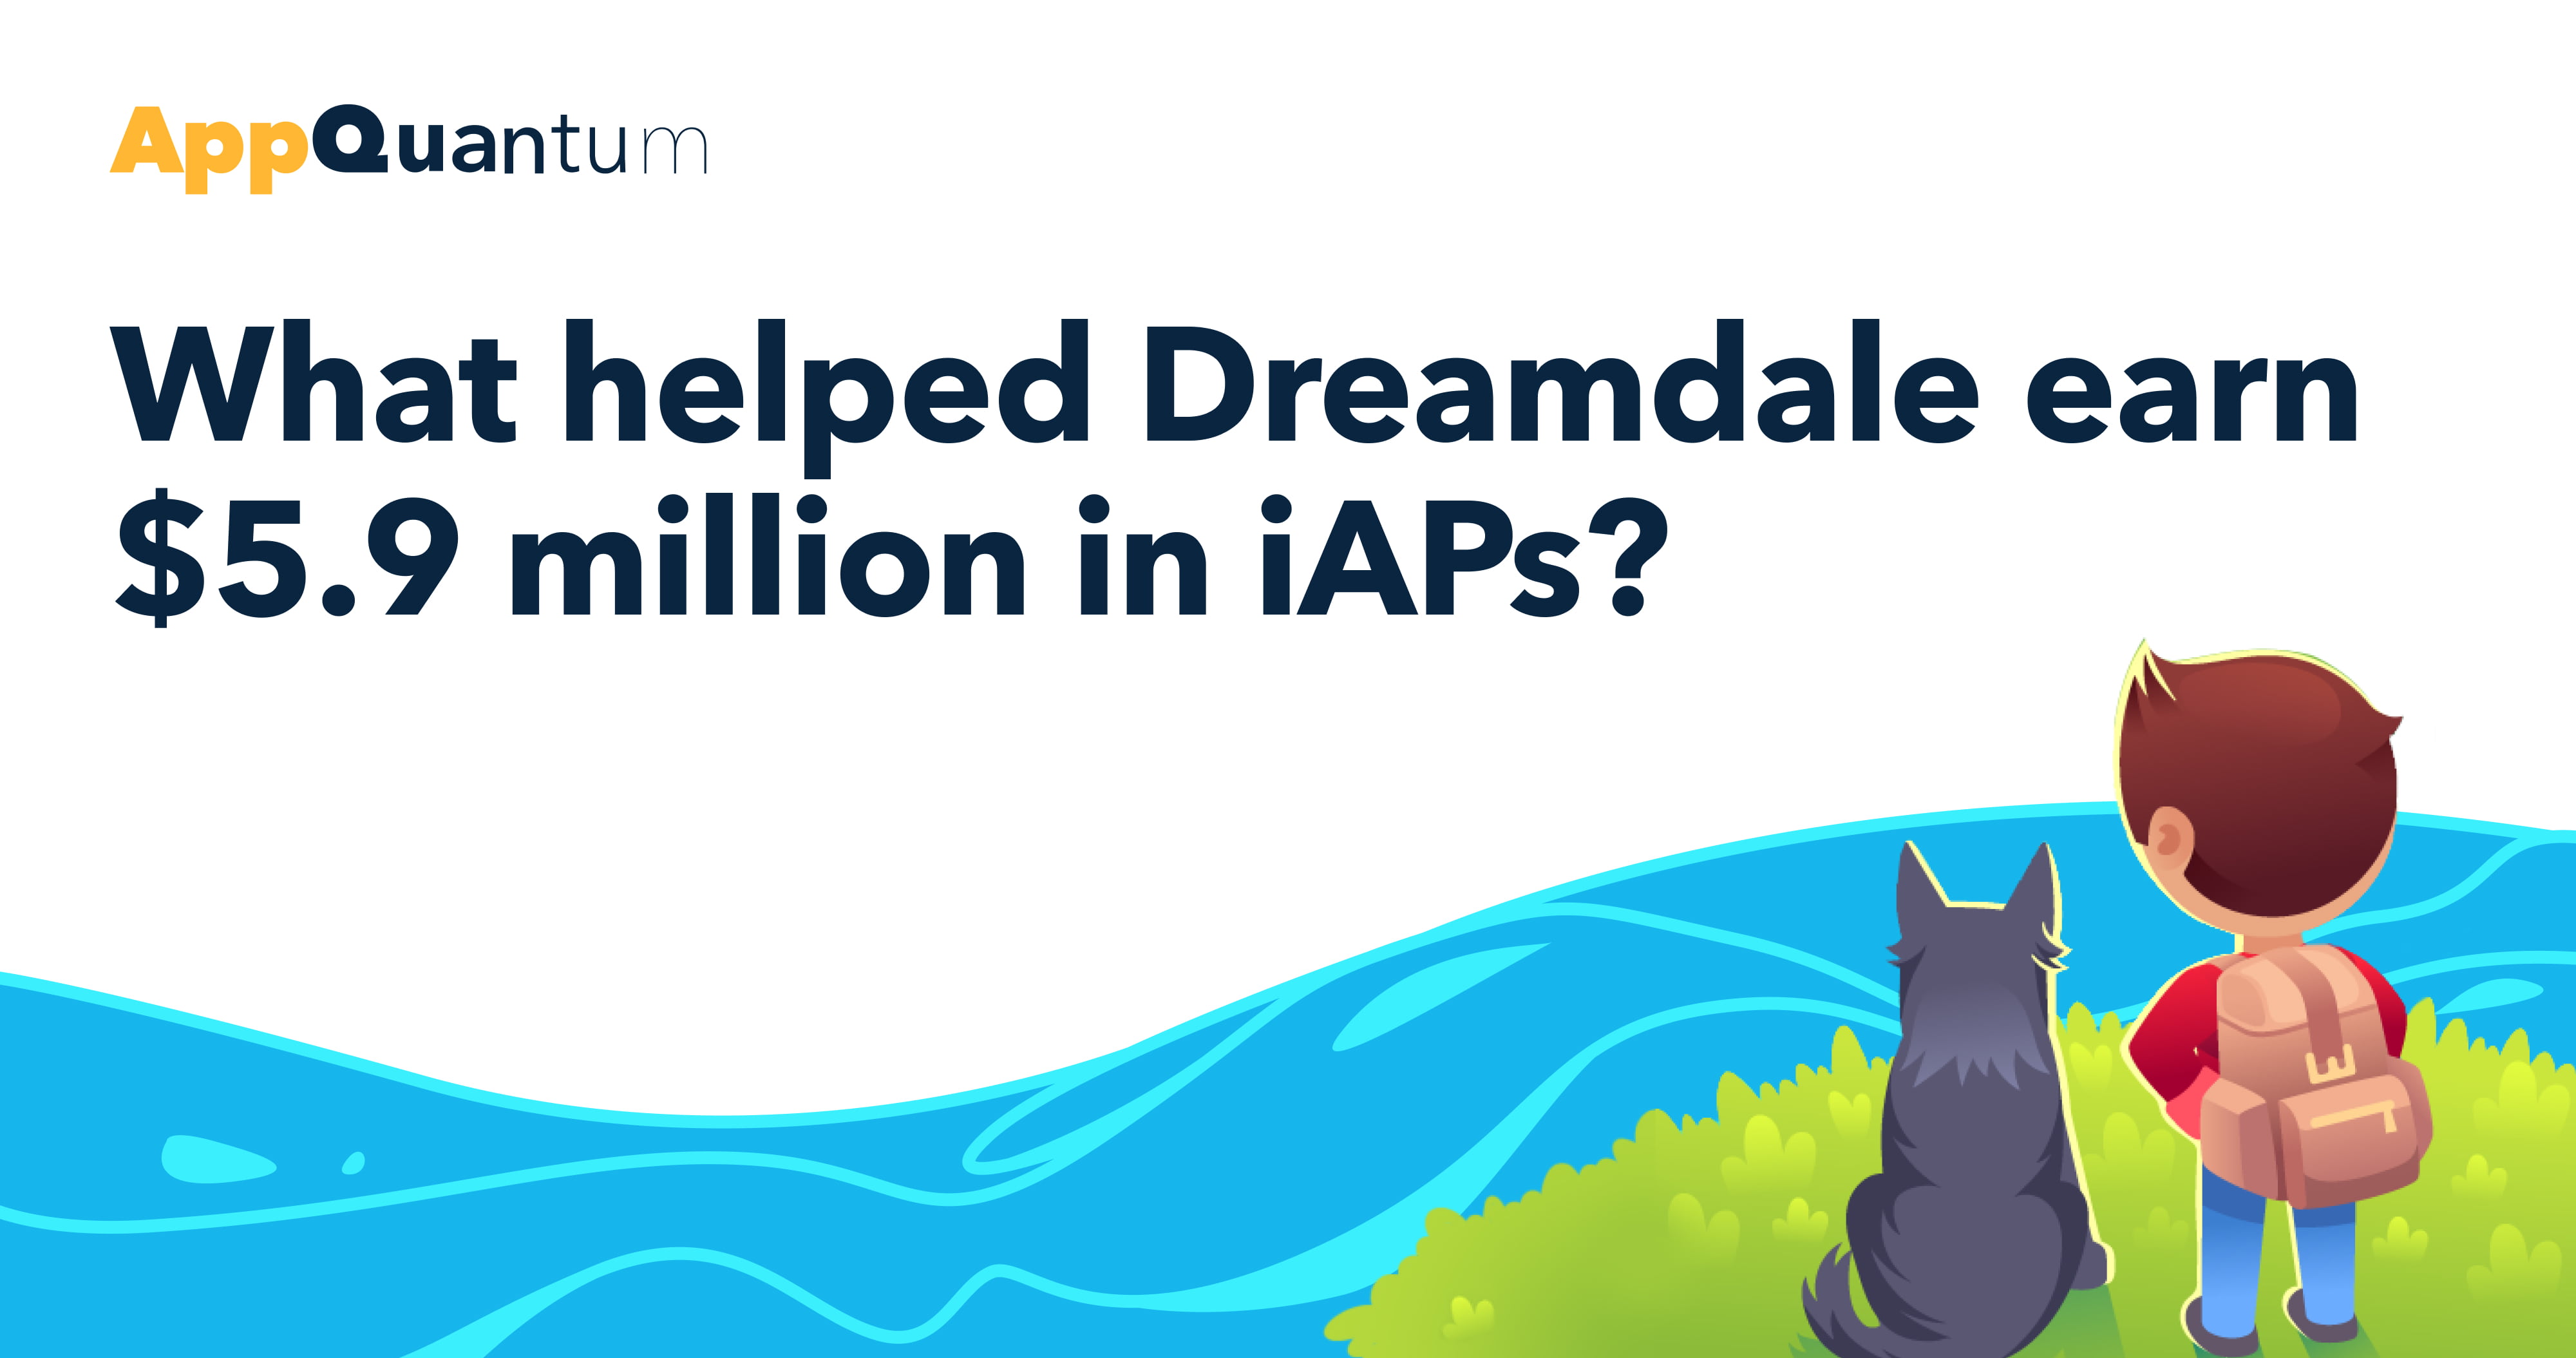 AppQuantum Deconstructs Dreamdale: What Helped the Game Earn $5.9 Million in iAPs